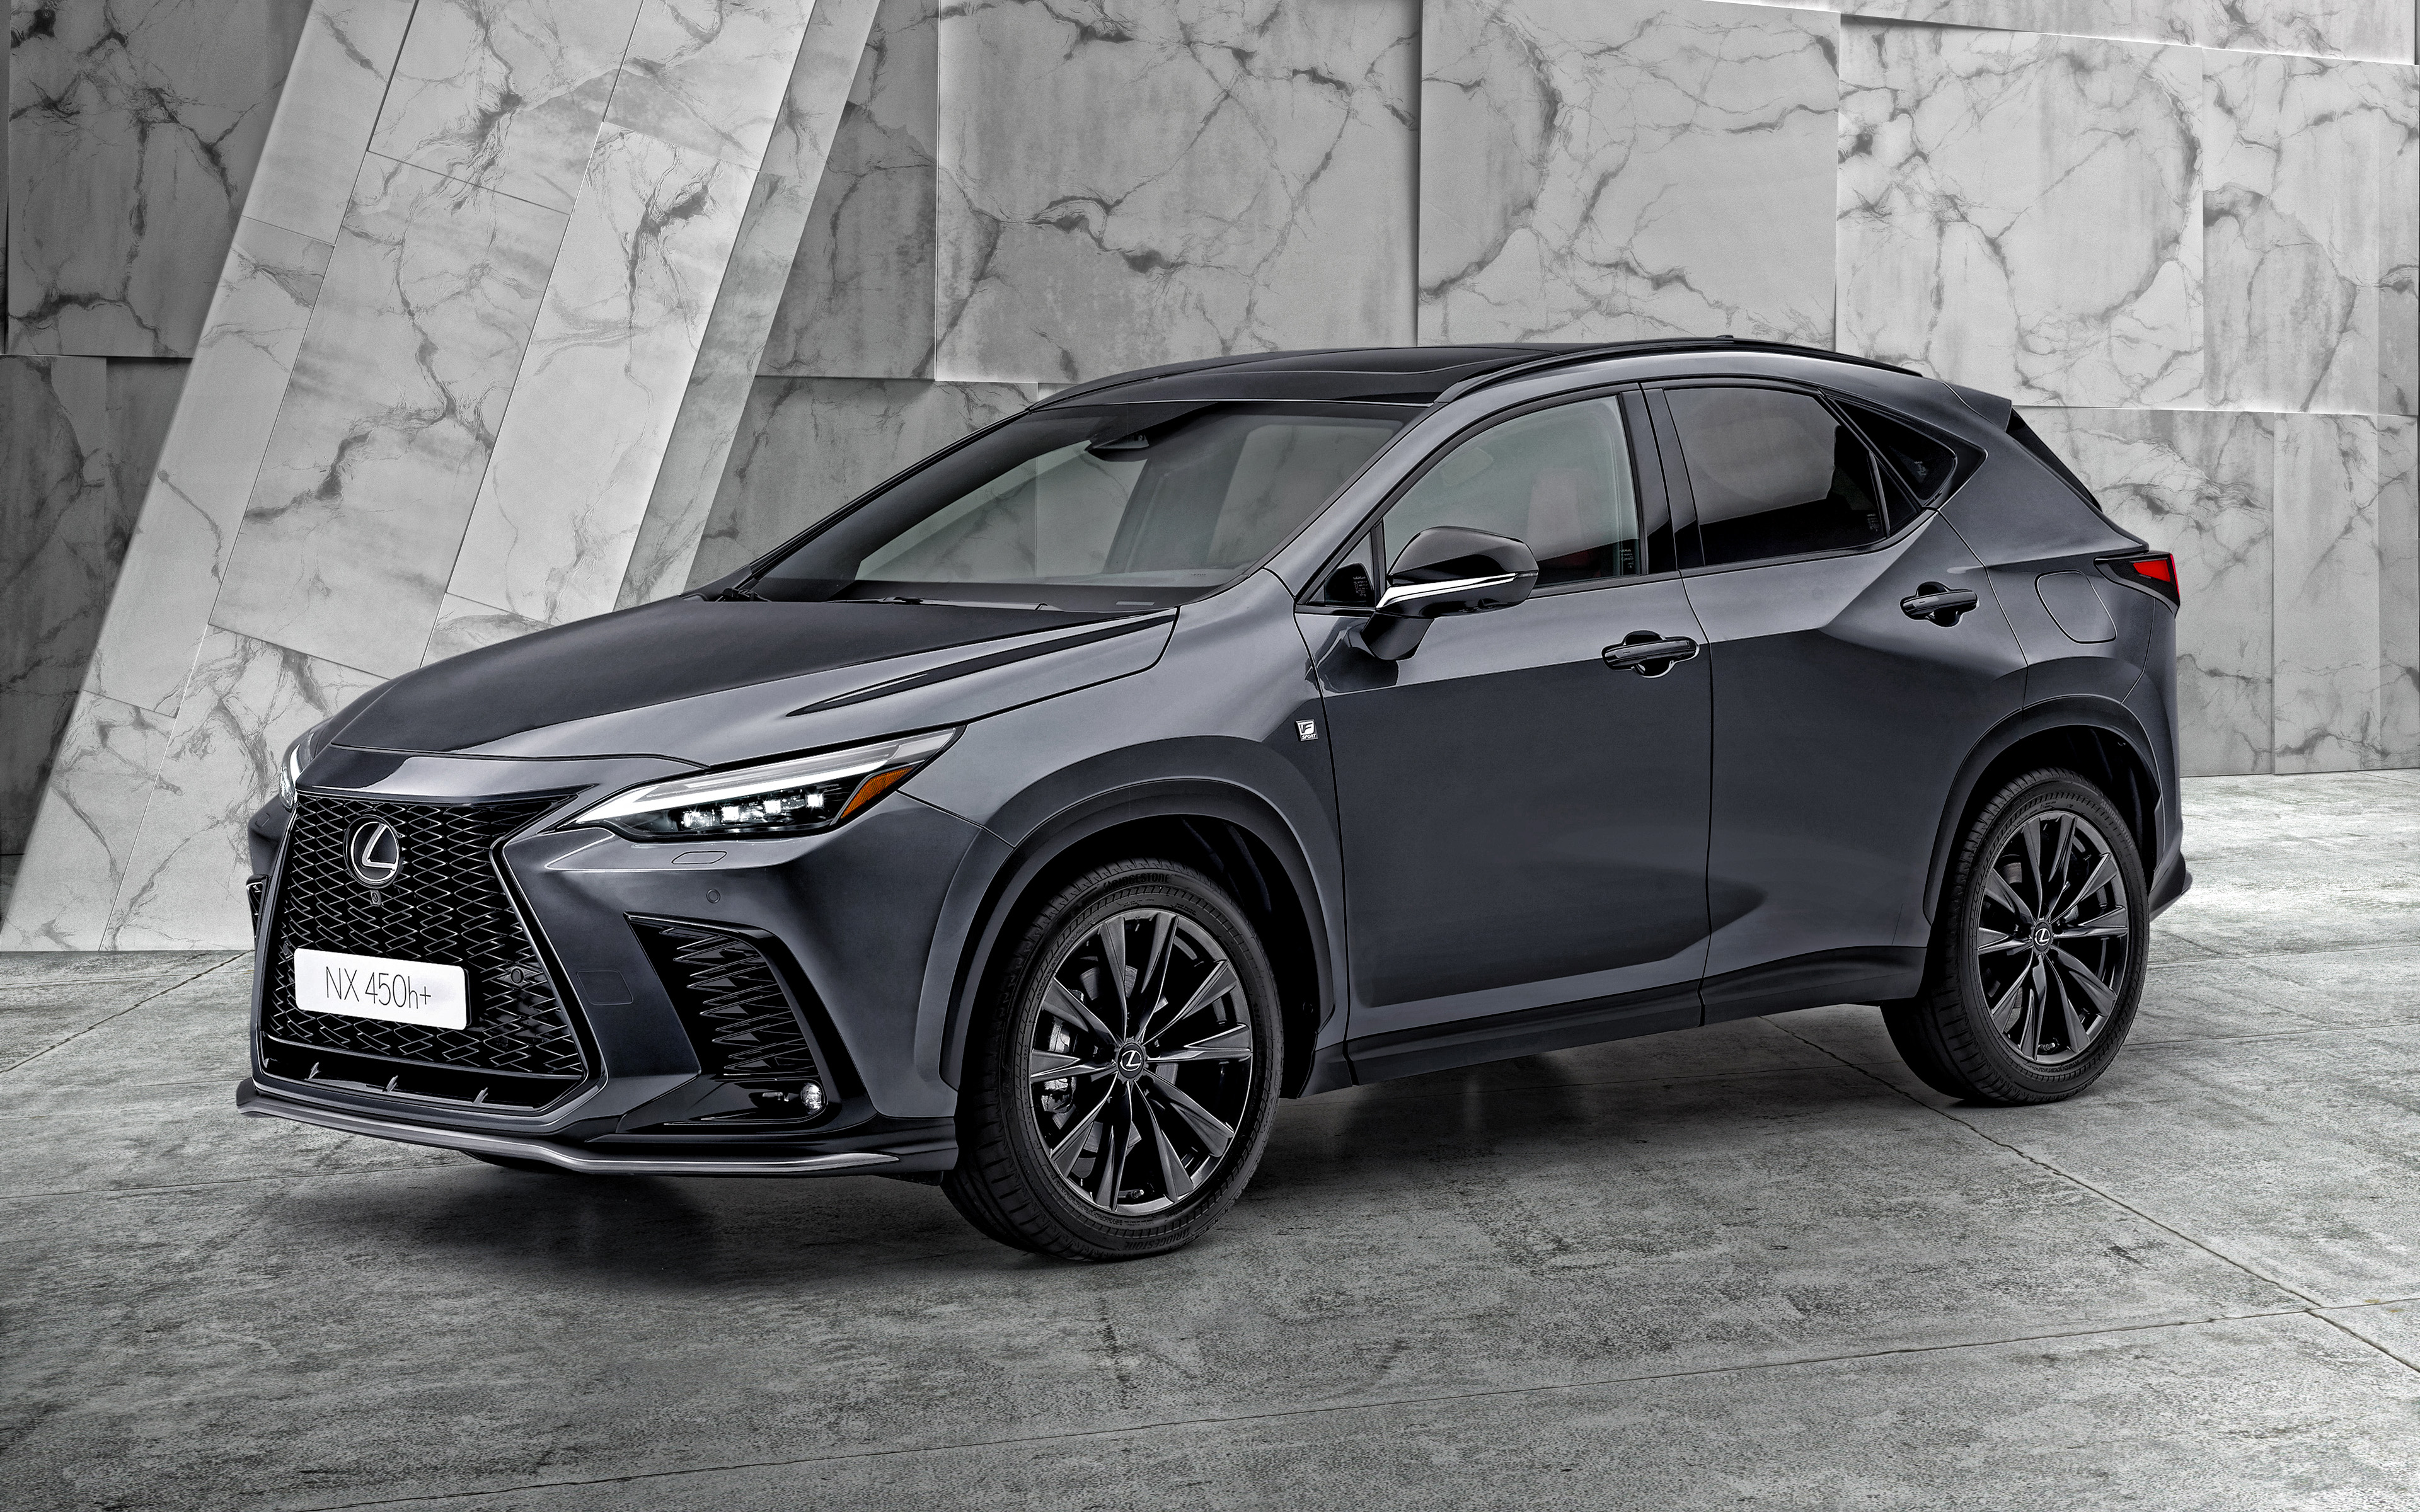 Download wallpaper Lexus NX 450h F Sport, 4k, front view, exterior, new gray Lexus NX, Japanese cars, Lexus for desktop with resolution 3840x2400. High Quality HD picture wallpaper